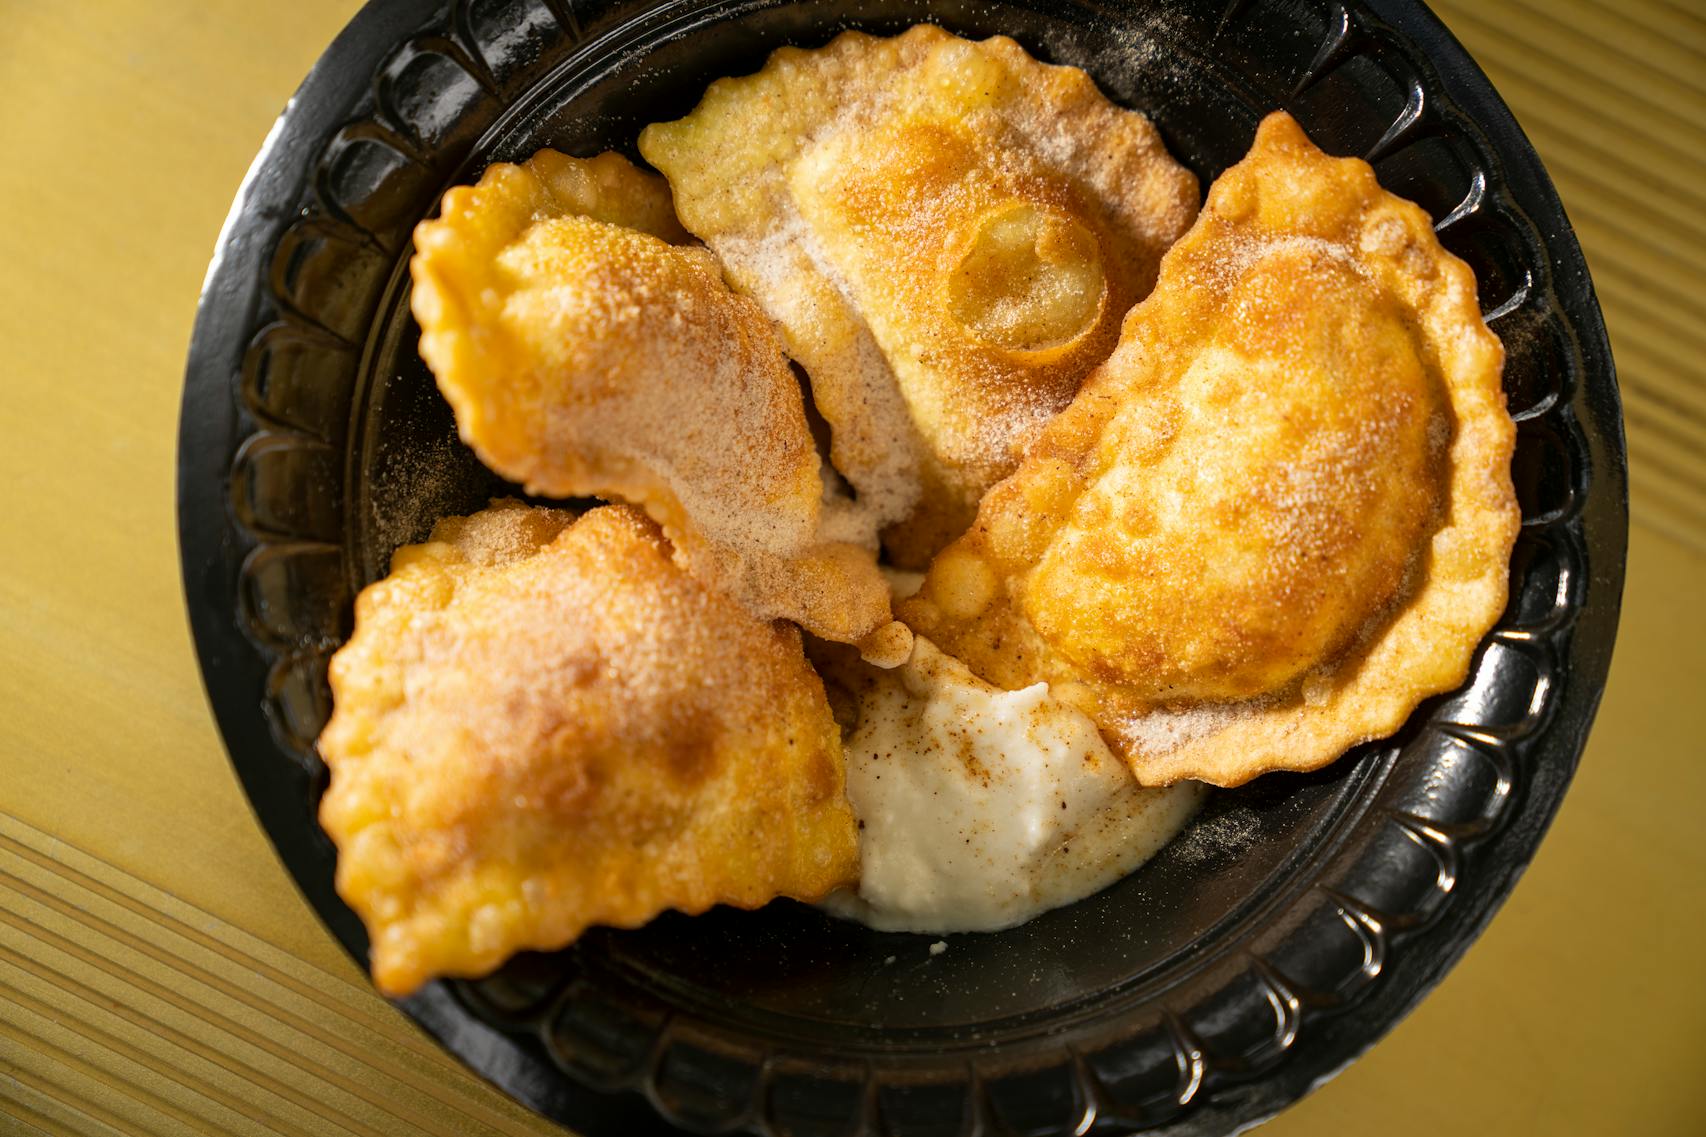 Fried Butternut Squash Ravioli from Oodles of Noodles. The new foods of the 2023 Minnesota State Fair photographed on the first day of the fair in Falcon Heights, Minn. on Tuesday, Aug. 8, 2023. ] LEILA NAVIDI • leila.navidi@startribune.com